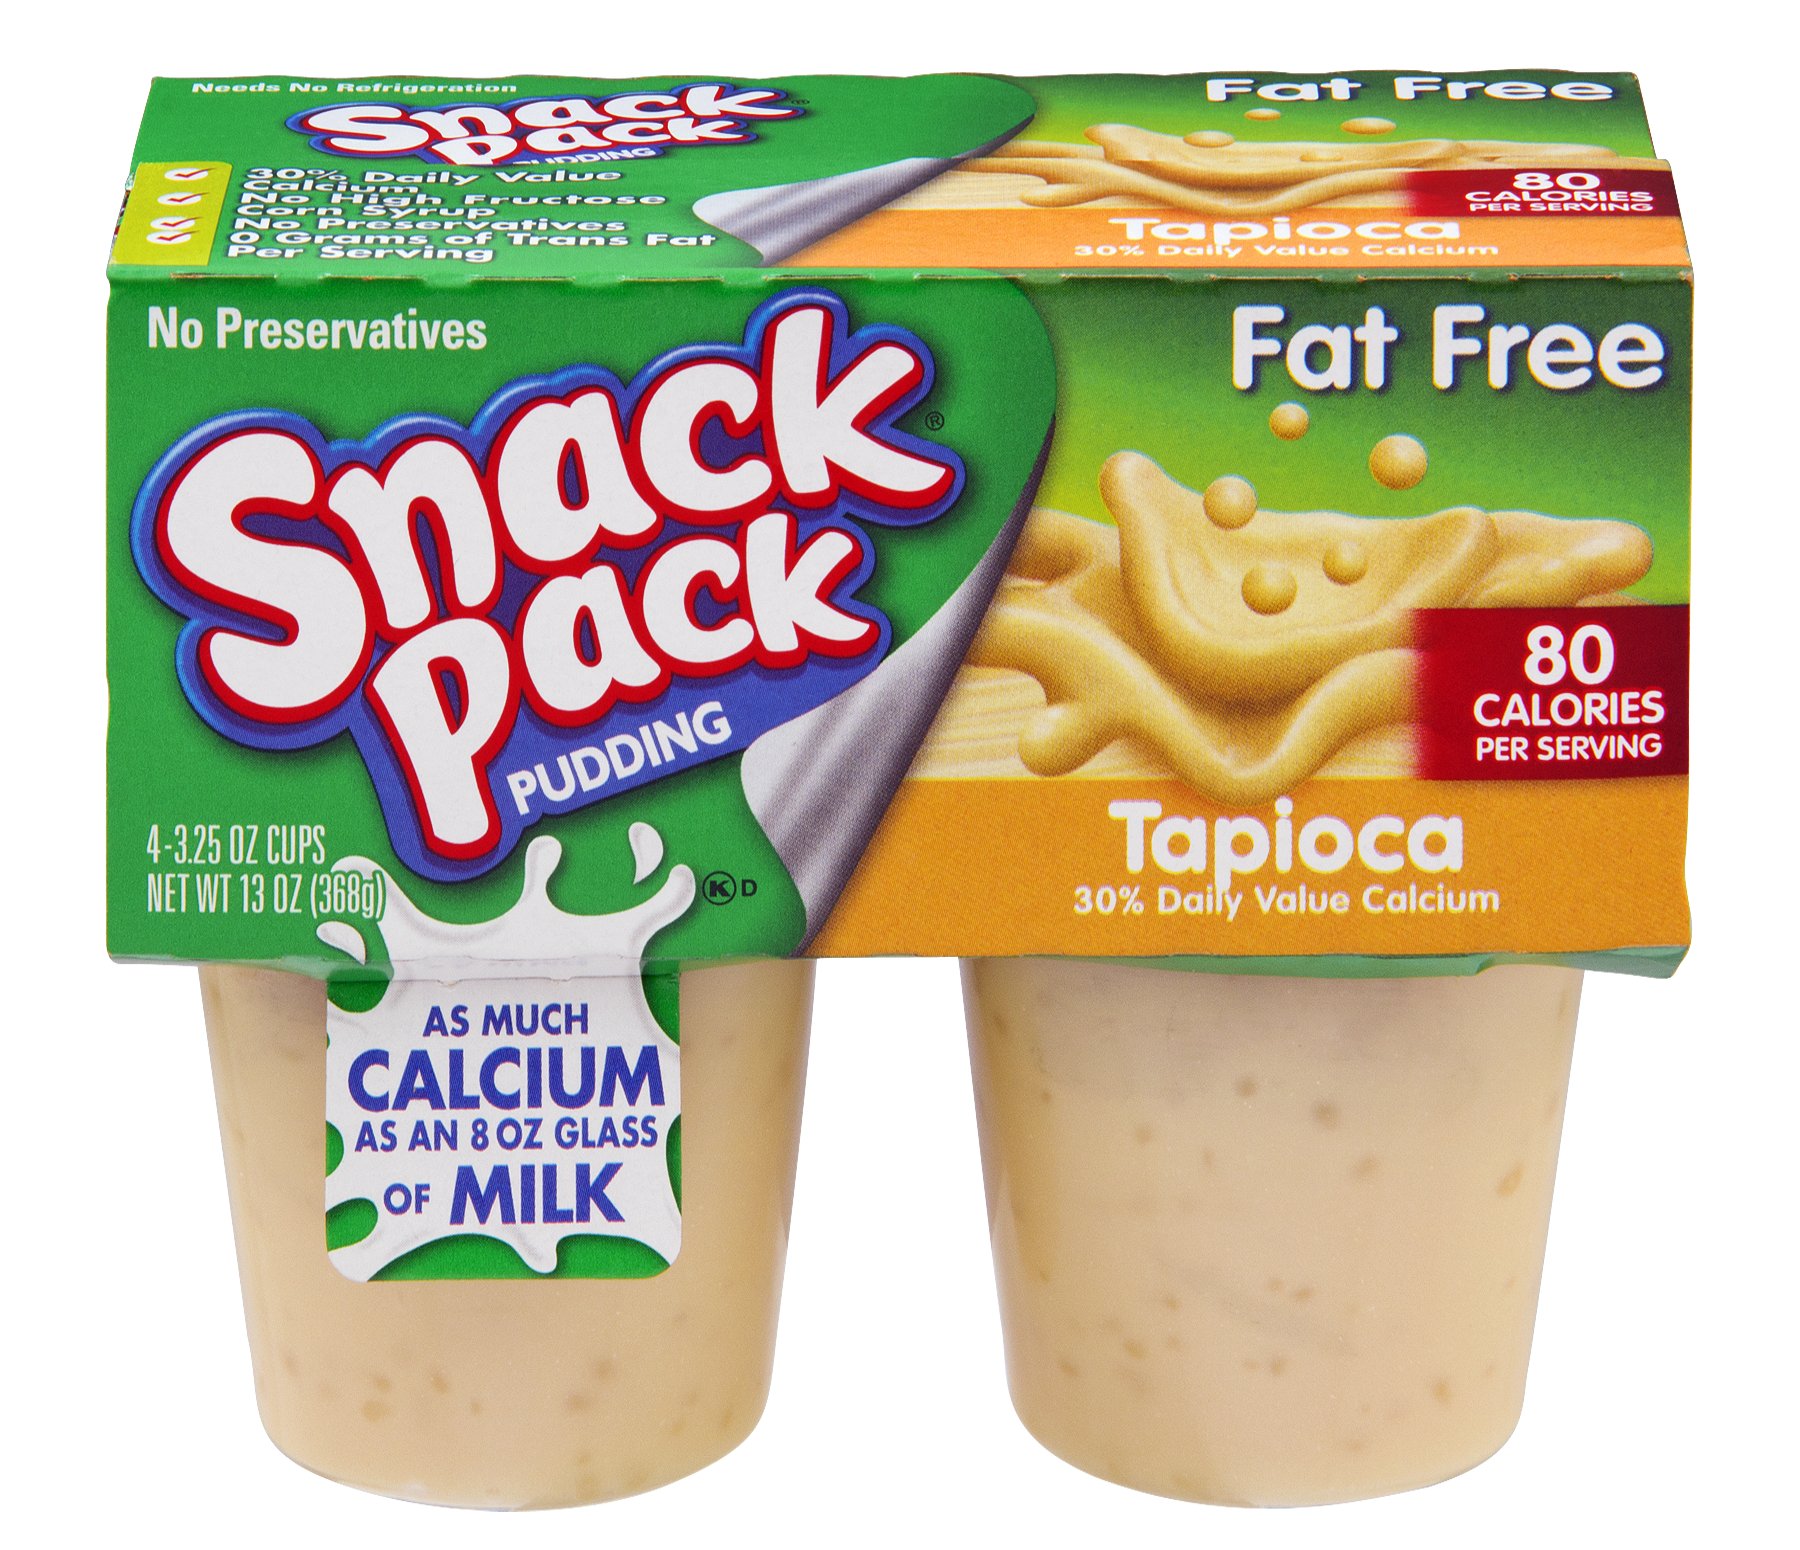 Hunt s Snack Pack Fat Free Tapioca Pudding Shop Pudding amp Gelatin at 